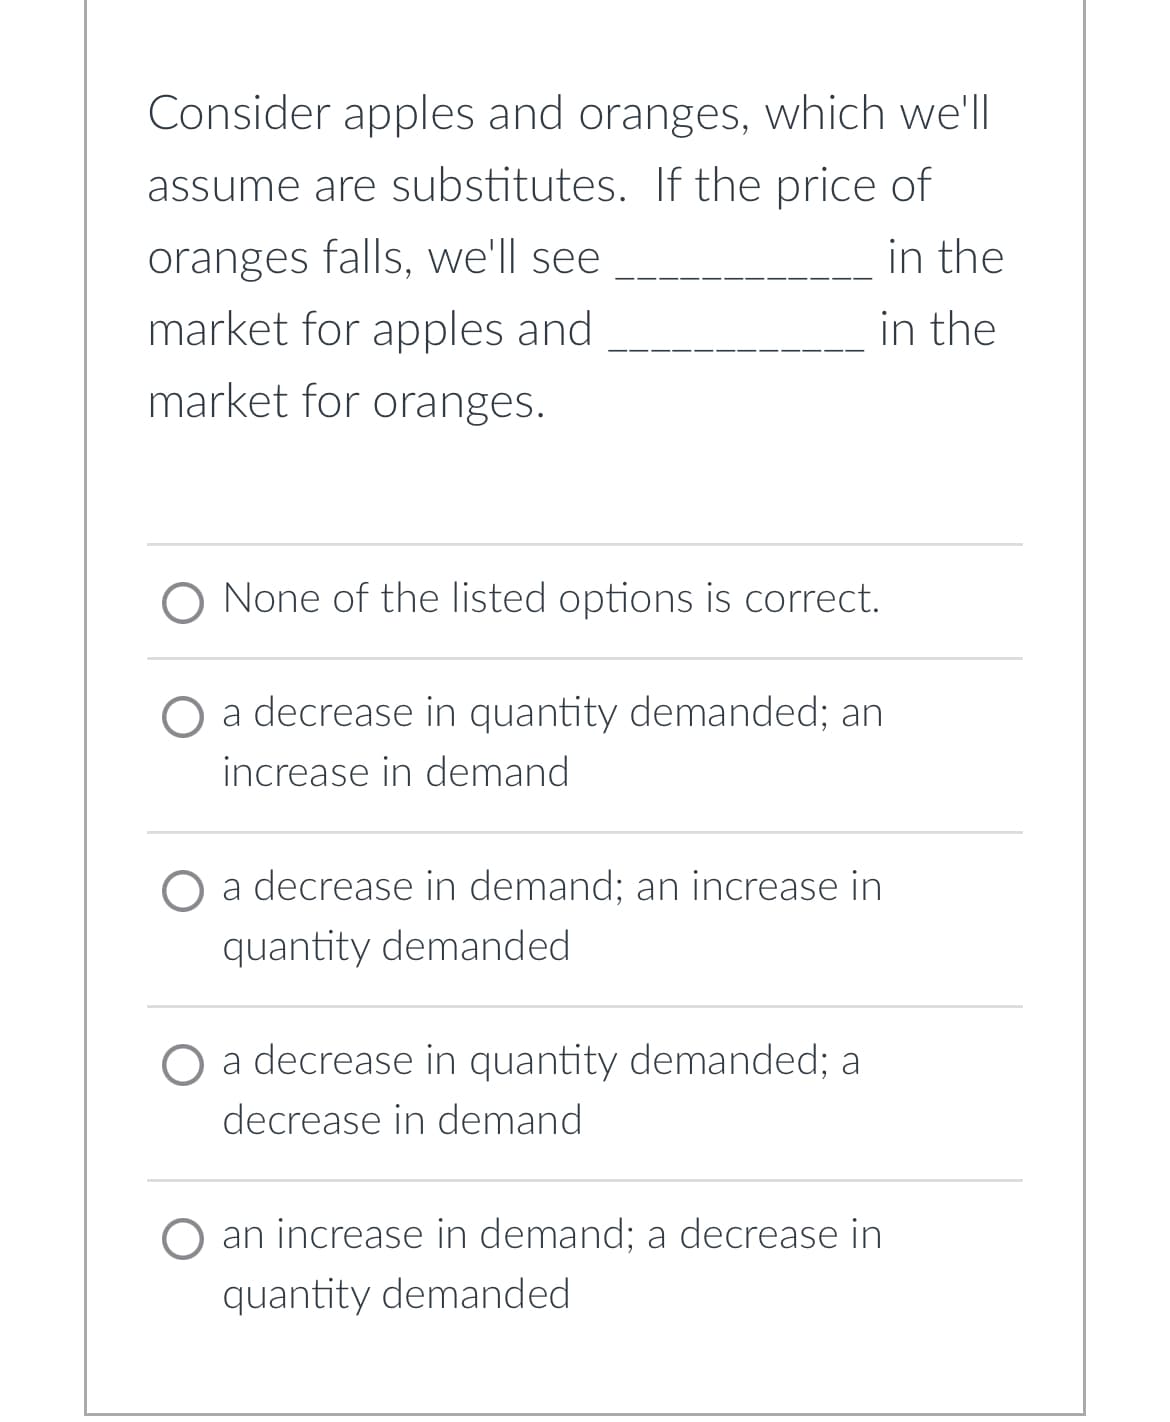 Consider apples and oranges, which we'll
assume are substitutes. If the price of
oranges falls, we'll see
in the
market for apples and
in the
market for oranges.
None of the listed options is correct.
O a decrease in quantity demanded; an
increase in demand
a decrease in demand; an increase in
quantity demanded
a decrease in quantity demanded; a
decrease in demand
an increase in demand; a decrease in
quantity demanded.